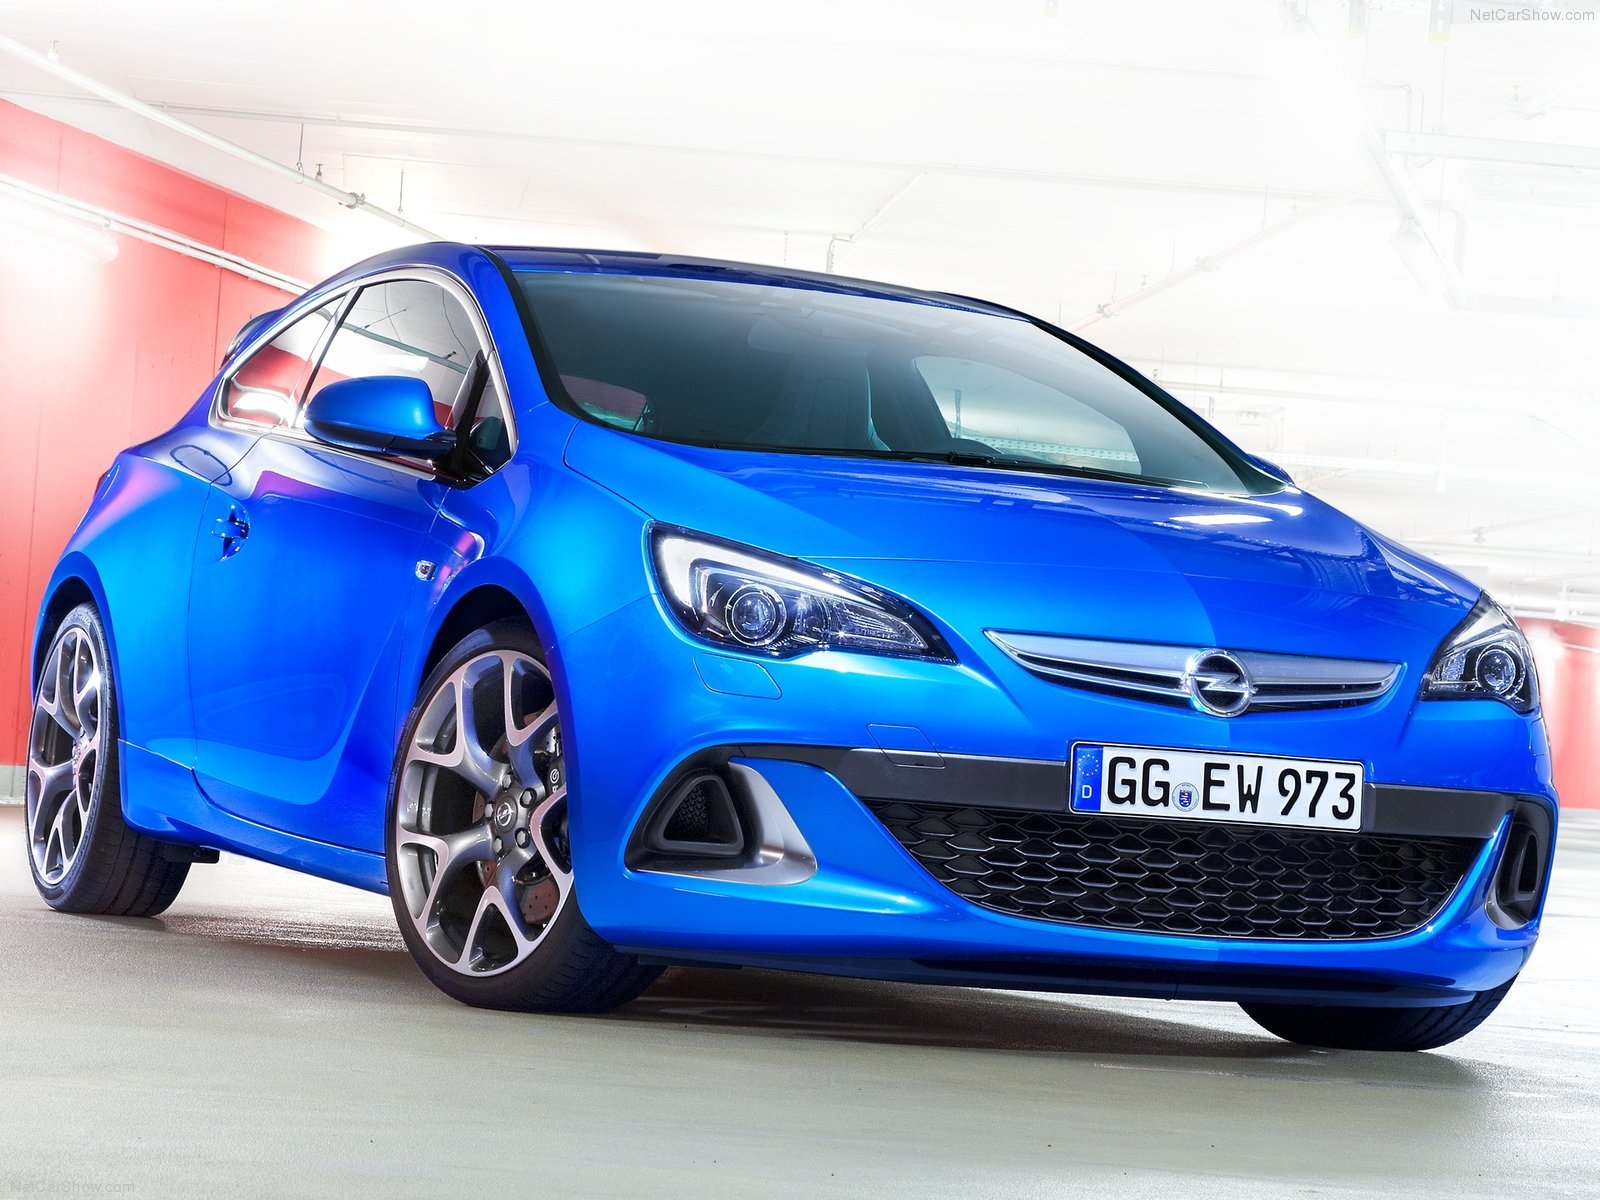 opel, Astra, Opc, Cars, Coupe, Blue, 2013 Wallpaper